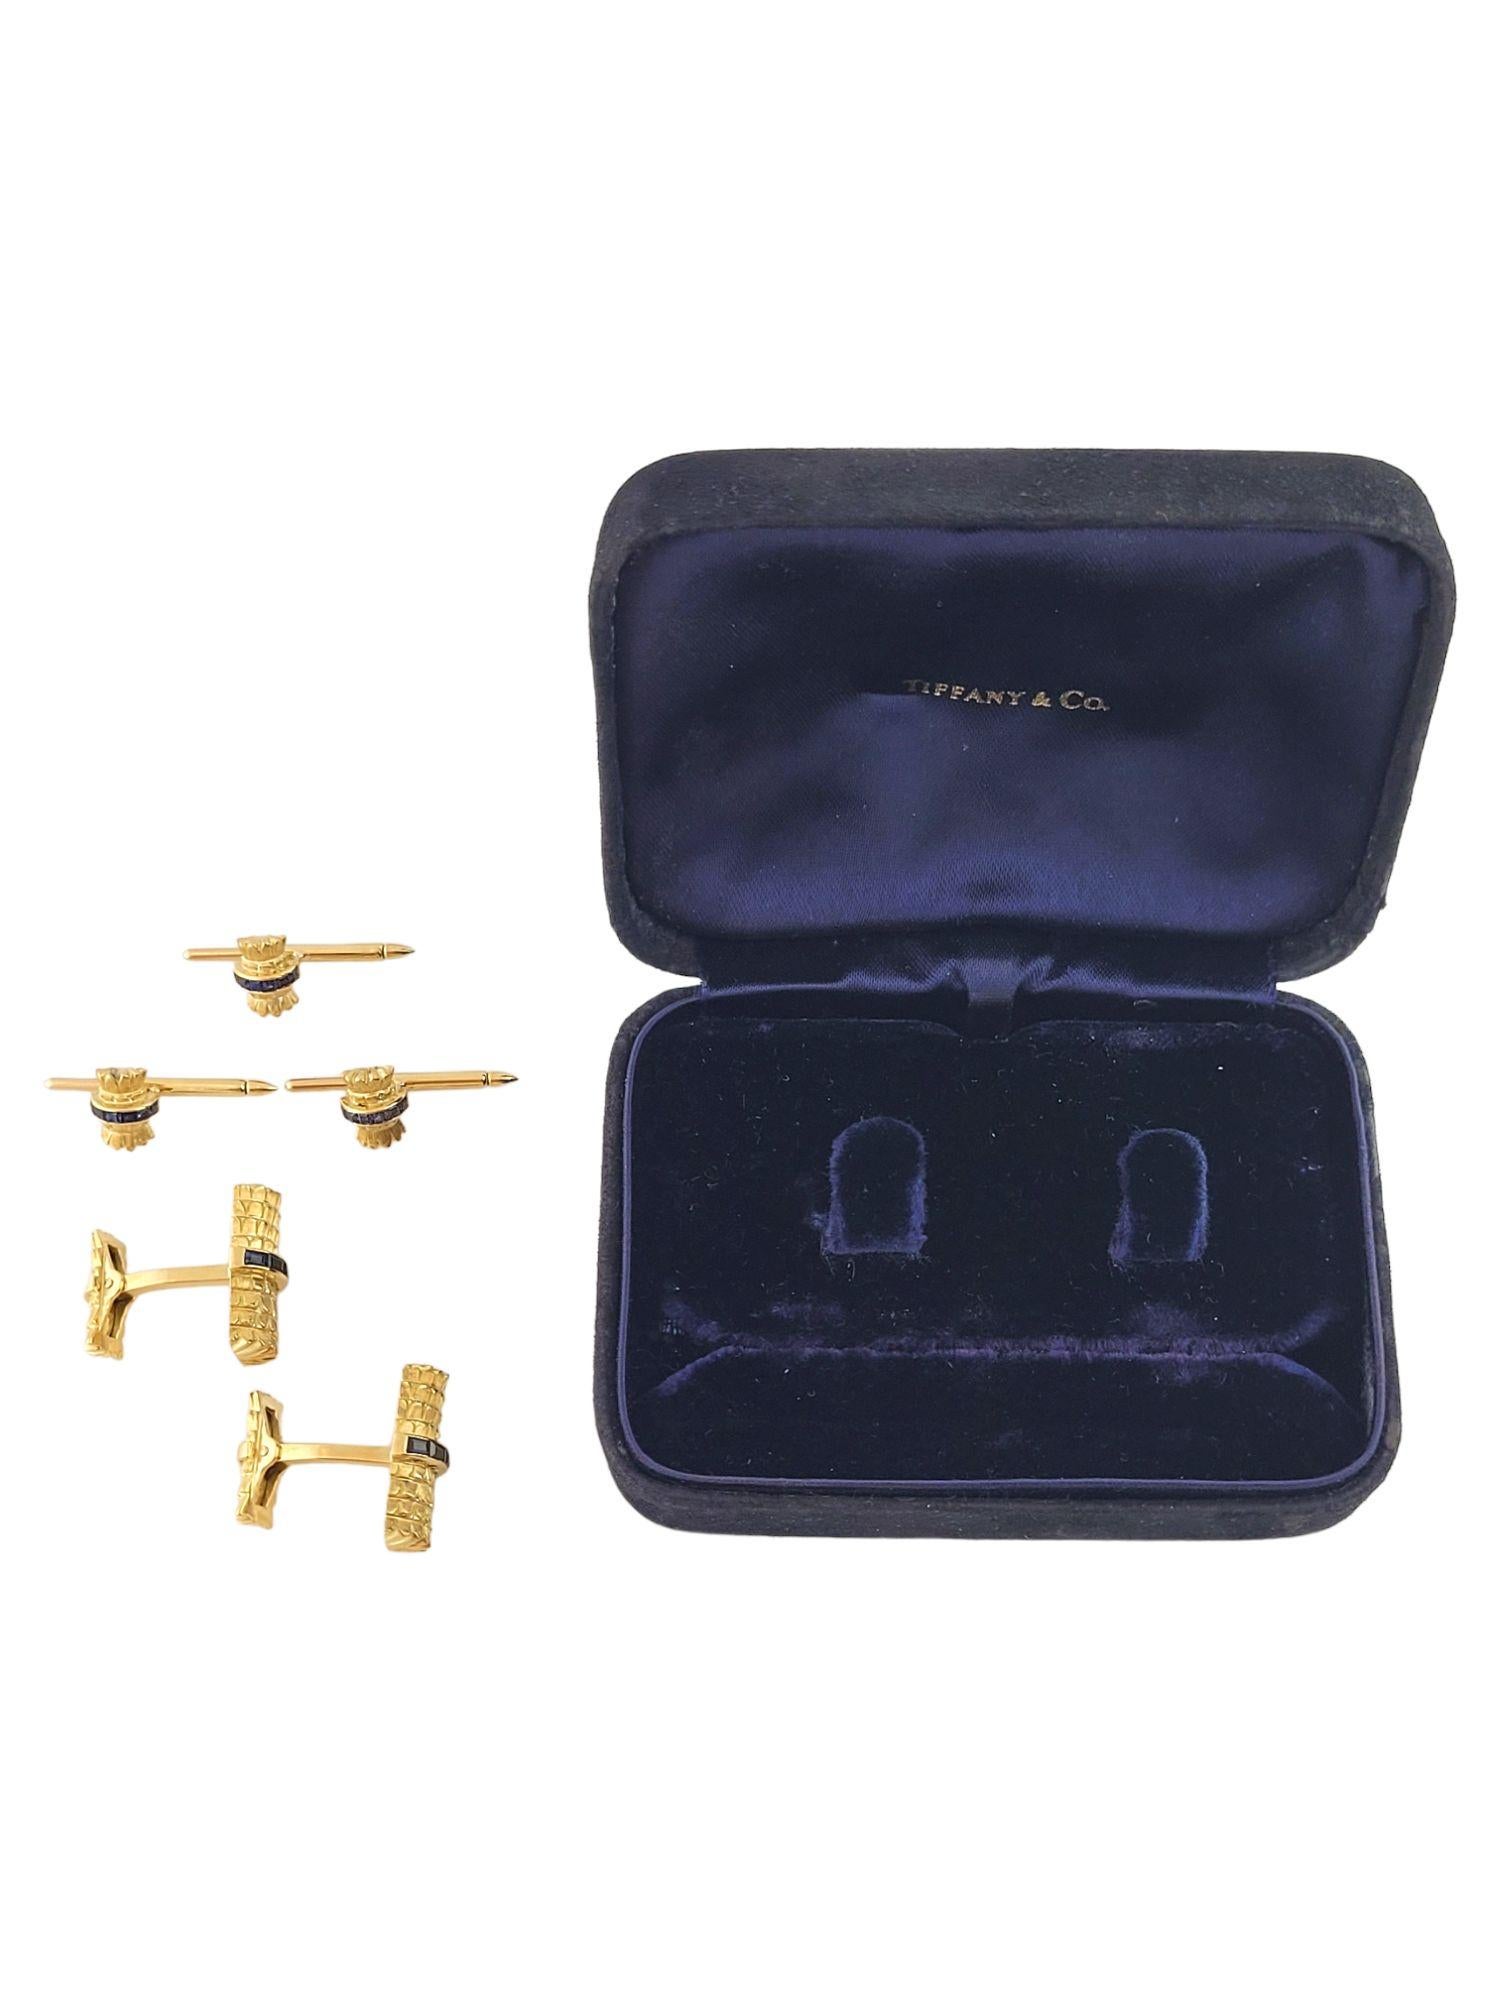 This beautiful set of gold cufflinks and studs by designer Tiffany & Co. are decorated with gorgeous blue sapphires for an amazing look!

Cufflinks-

Size: 23.6mm X 20.2mm X 10.6mm

Weight: 14.78 g/ 9.5 dwt

Hallmark: Tiffany & Co 18K

10 blue